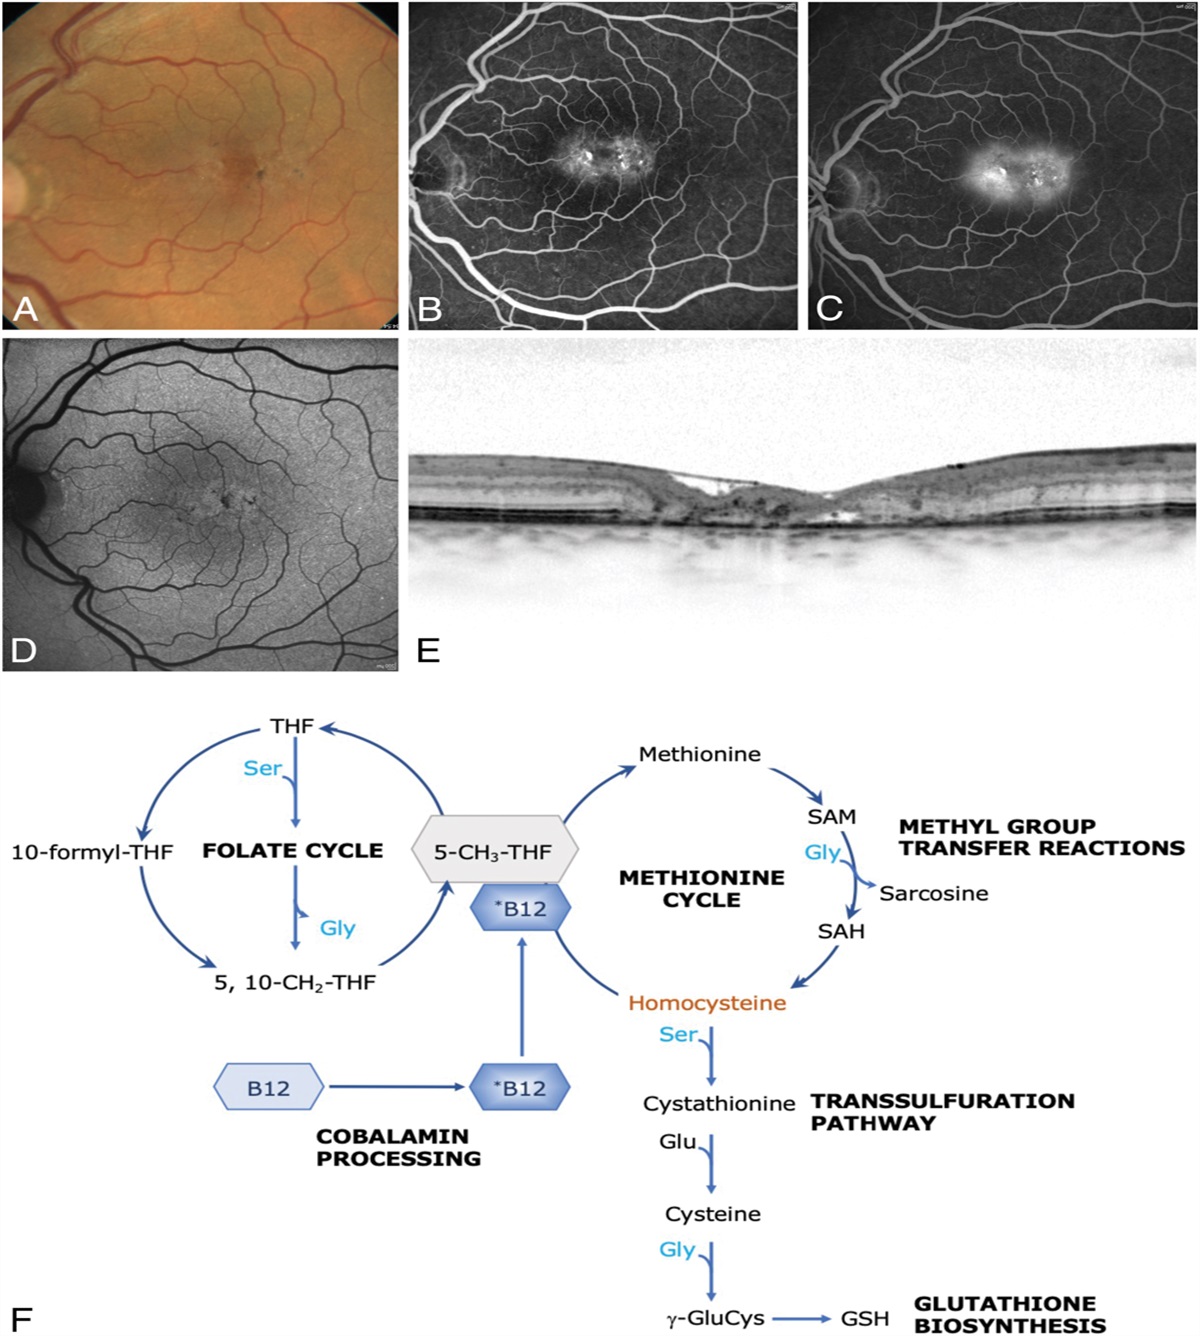 METHYLATION-ASSOCIATED PATHWAYS IN MACULAR TELANGIECTASIA TYPE 2 AND OPHTHALMOLOGIC FINDINGS IN PATIENTS WITH GENETIC METHYLATION DISORDERS